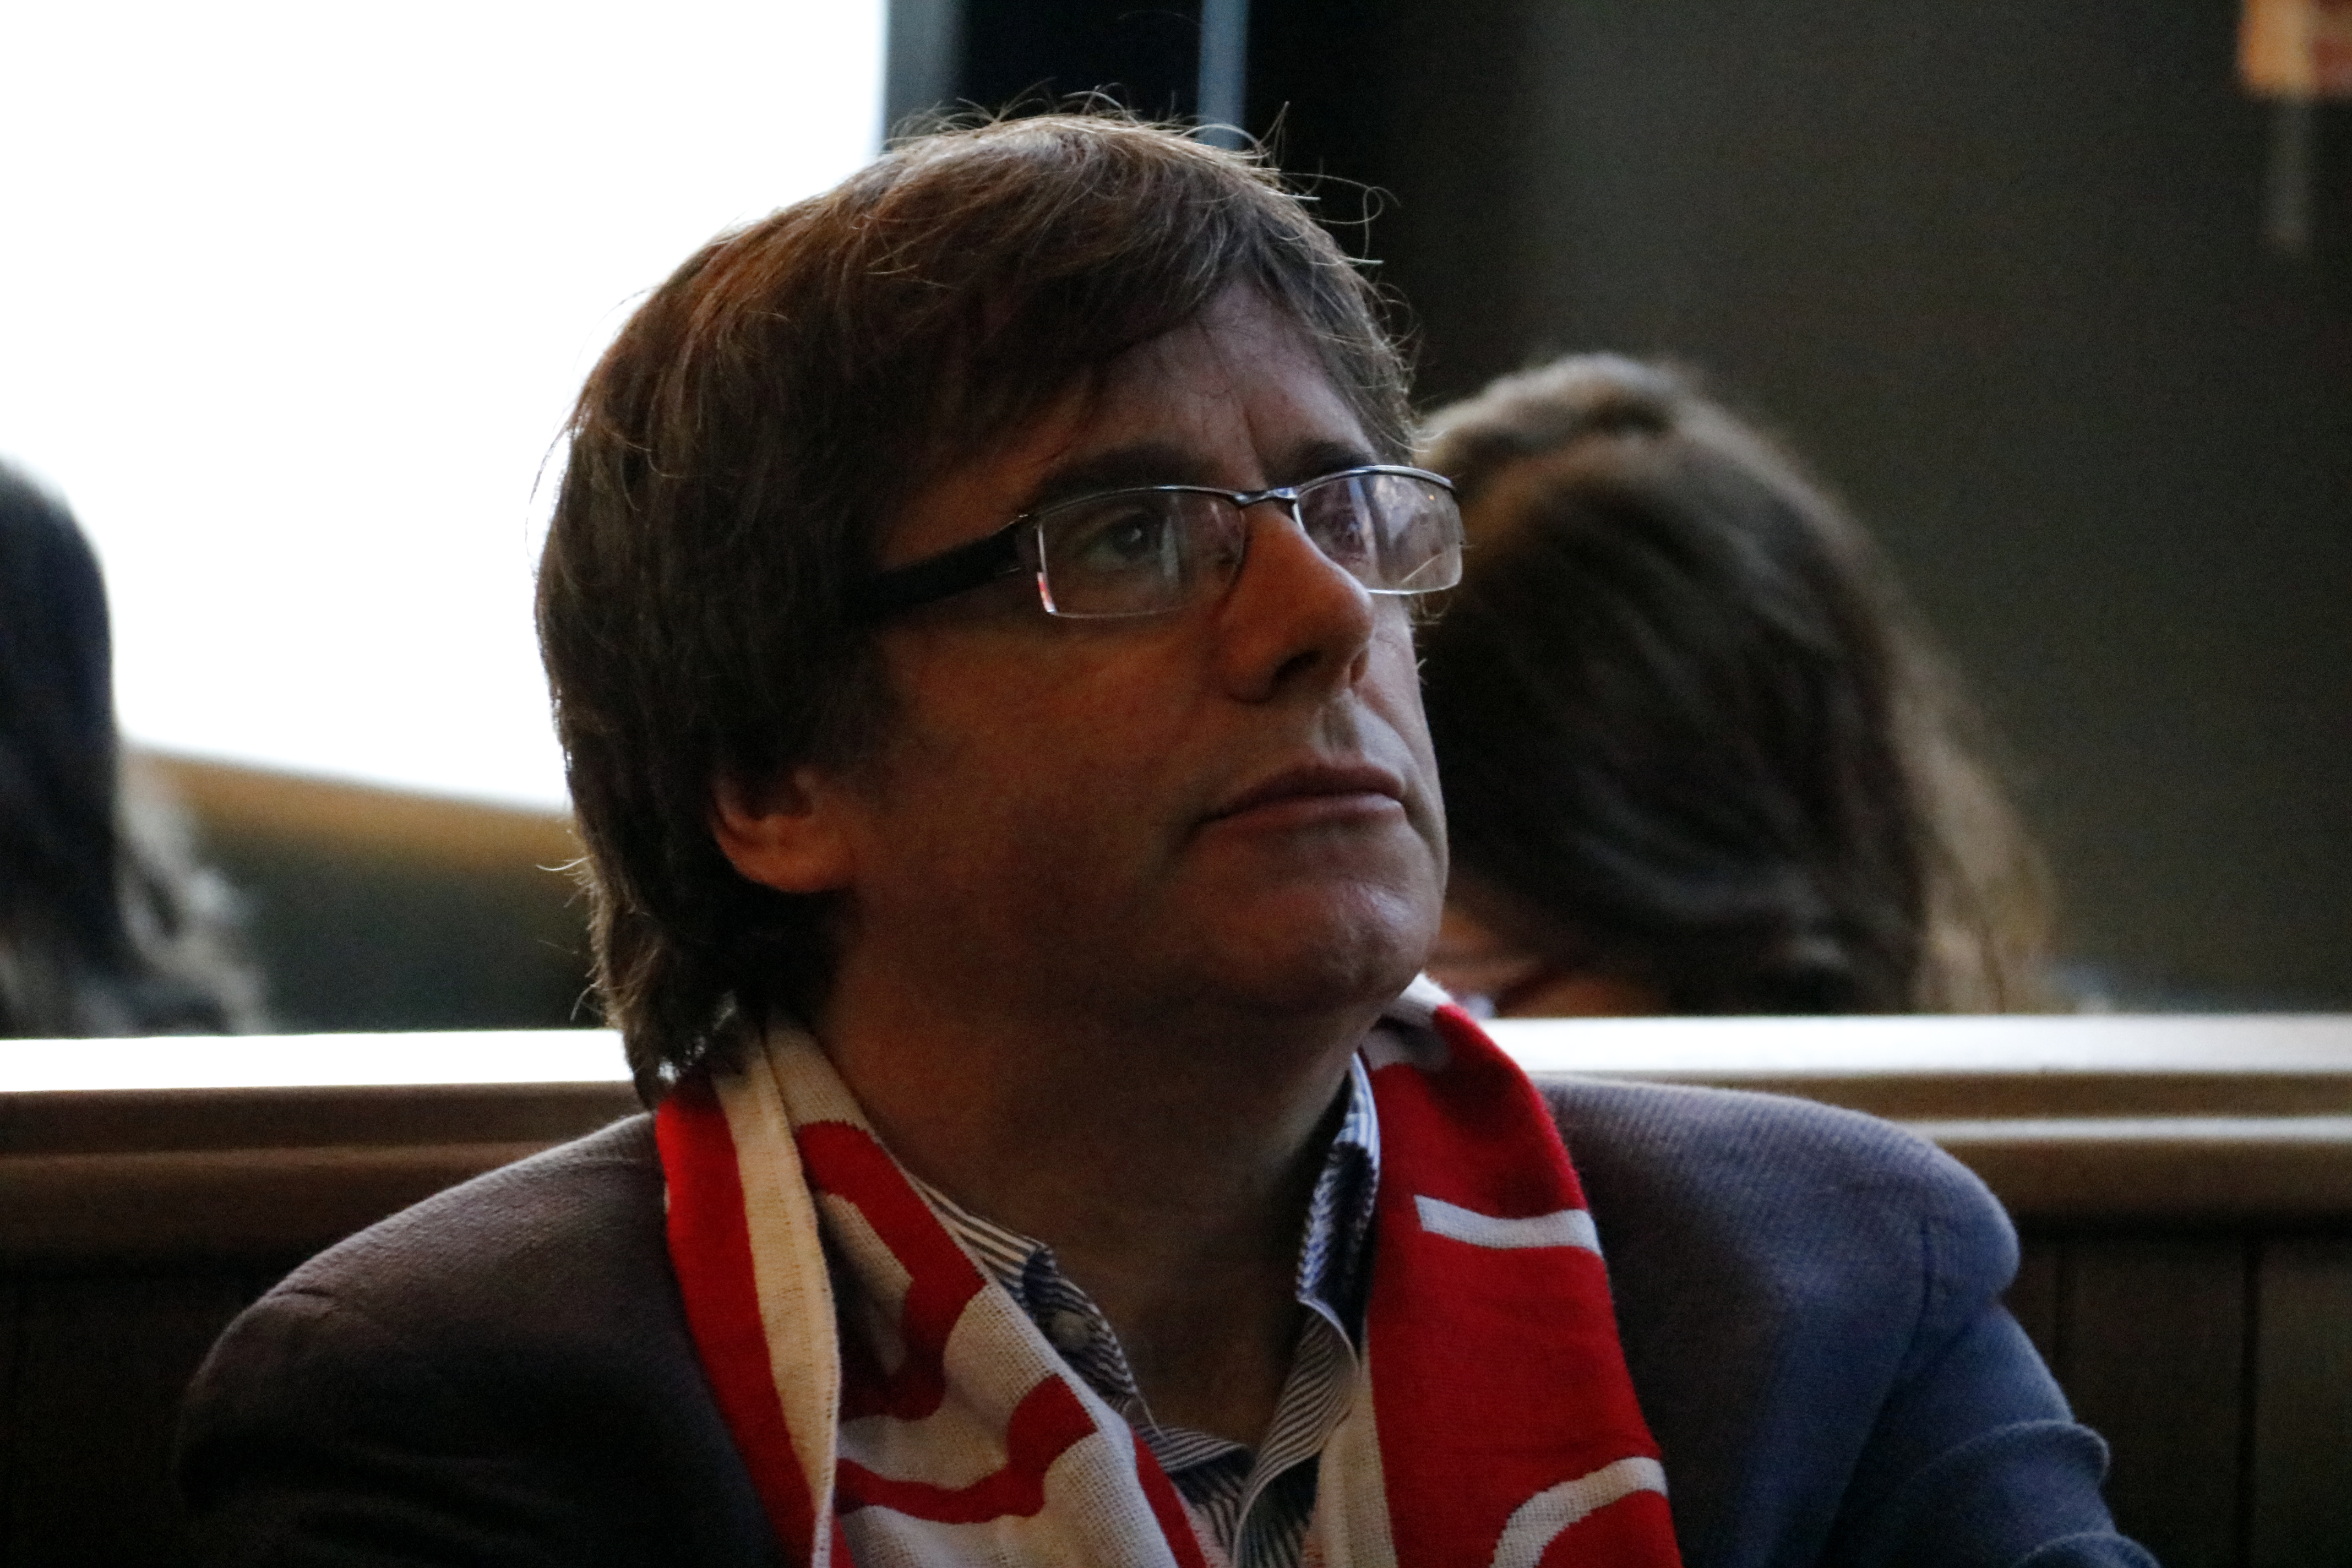 Carles Puigdemont watches the Girona football match from Brussels during the charity event where he gave away a signed Girona FC football jersey to raise money (by José Soler)